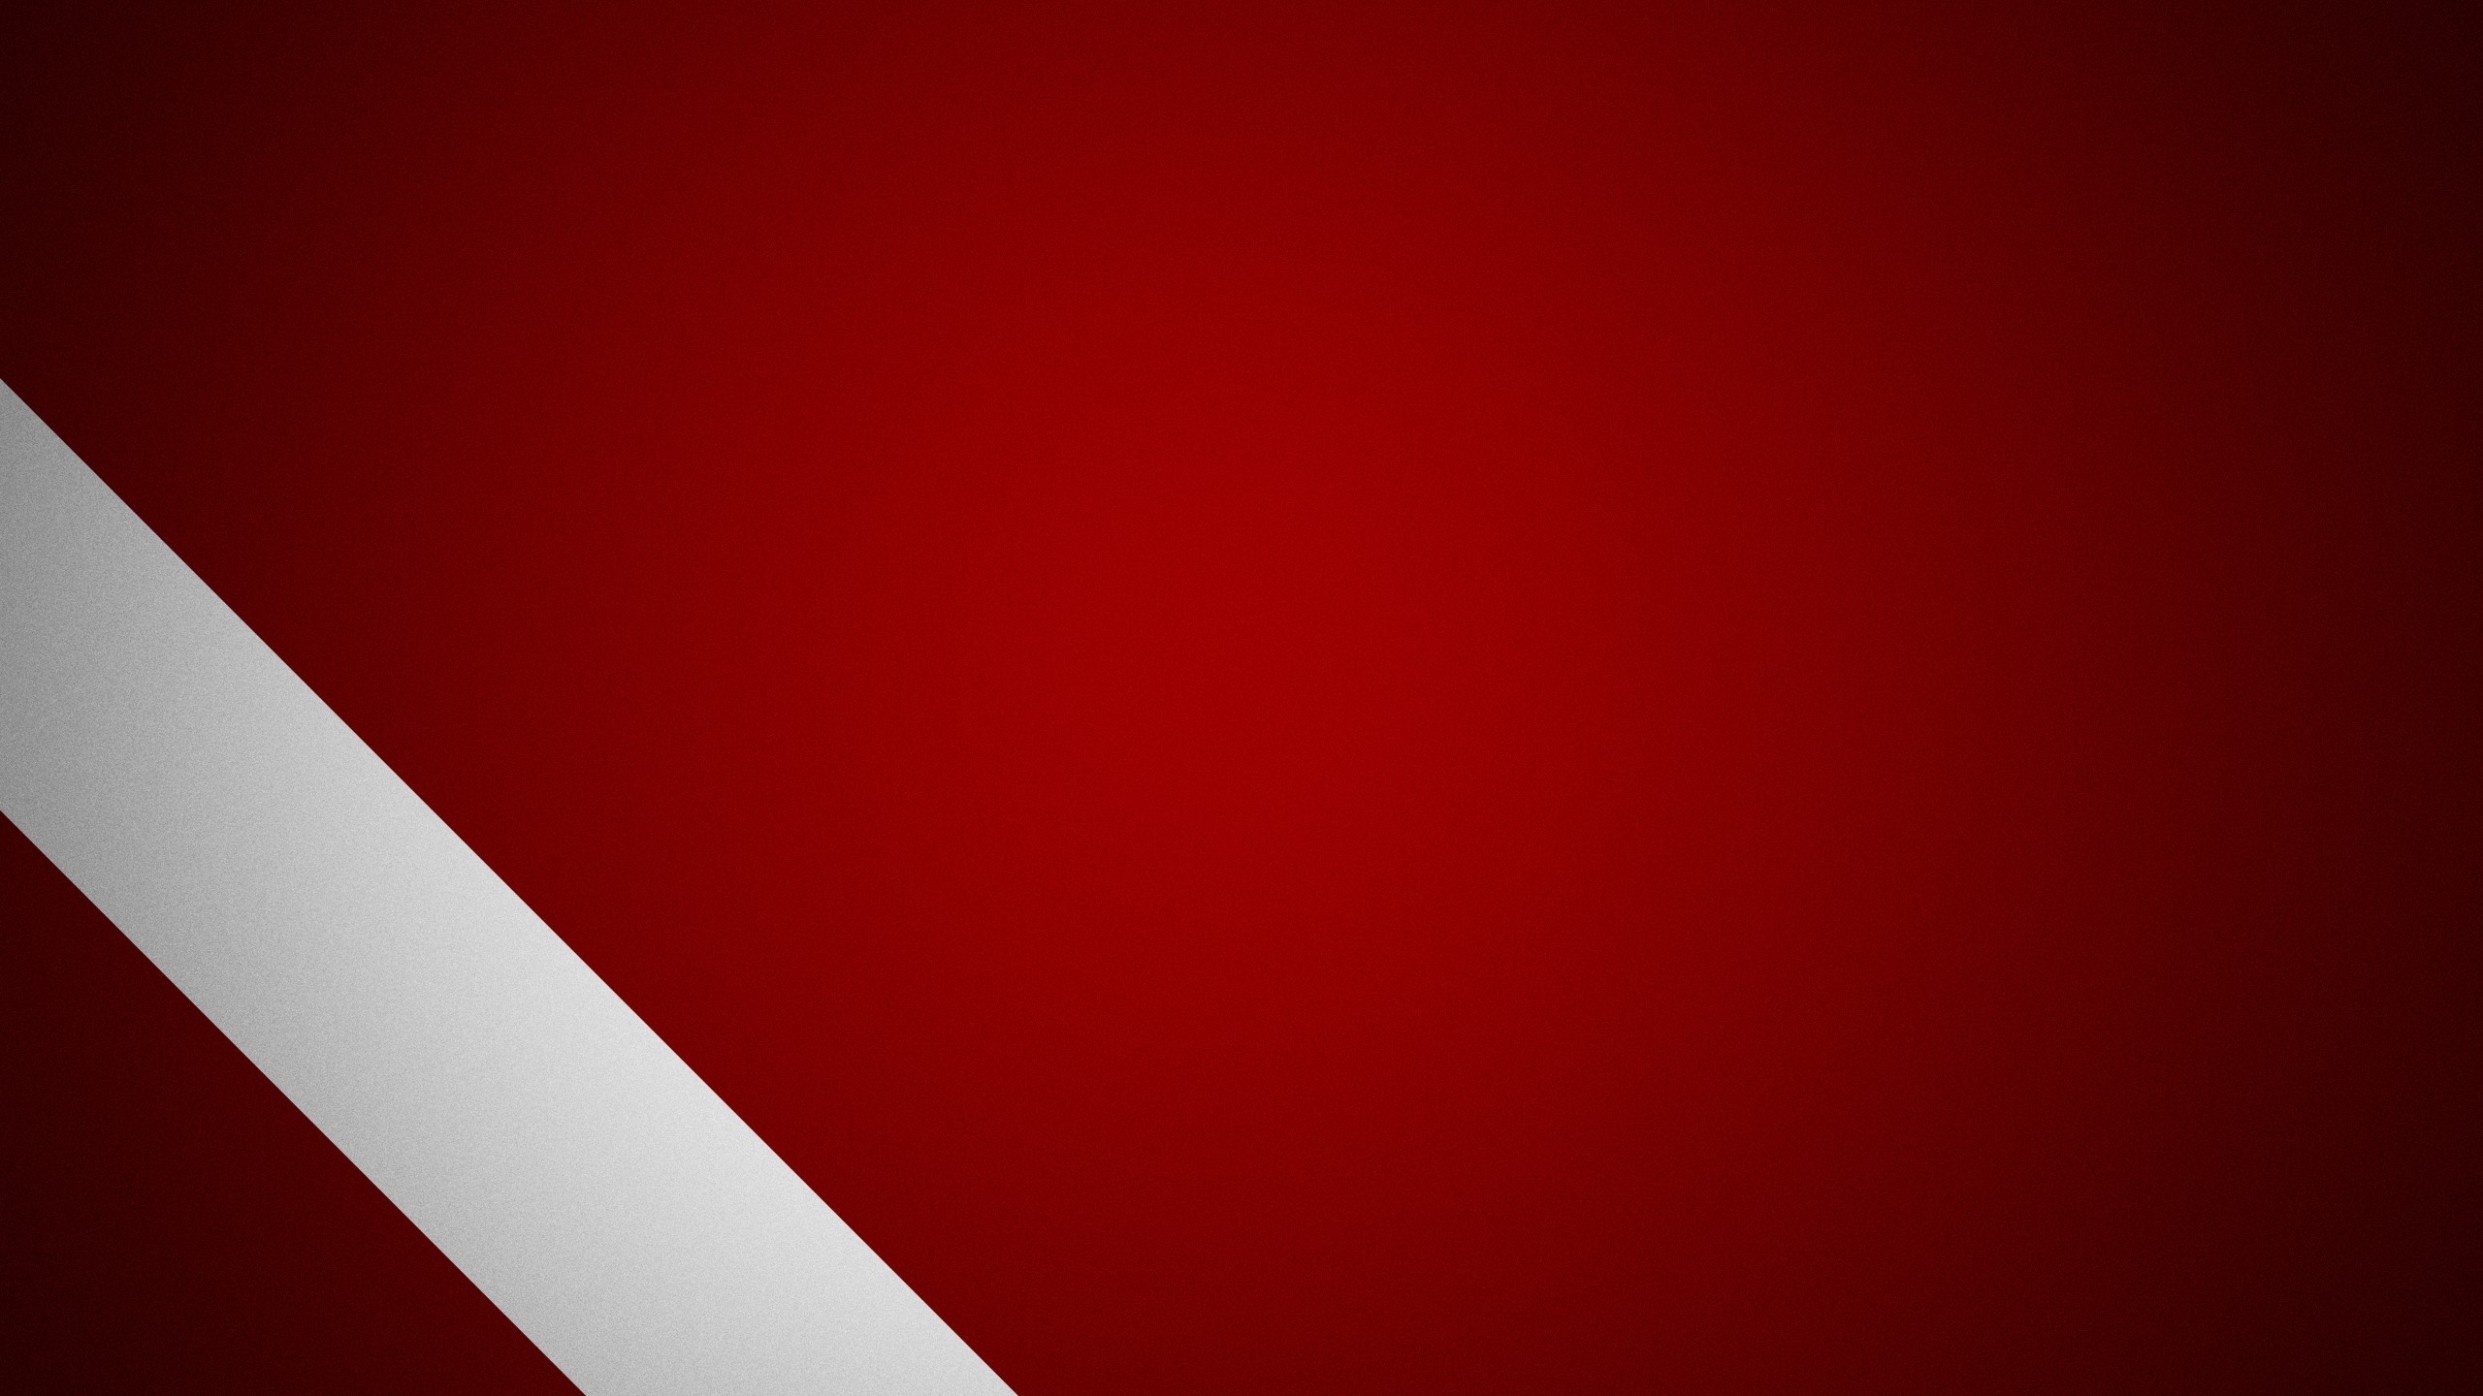 2483x1396 Red white and black backgrounds background hdblackwallpaper com red and  white wallpaper jpg  Red white